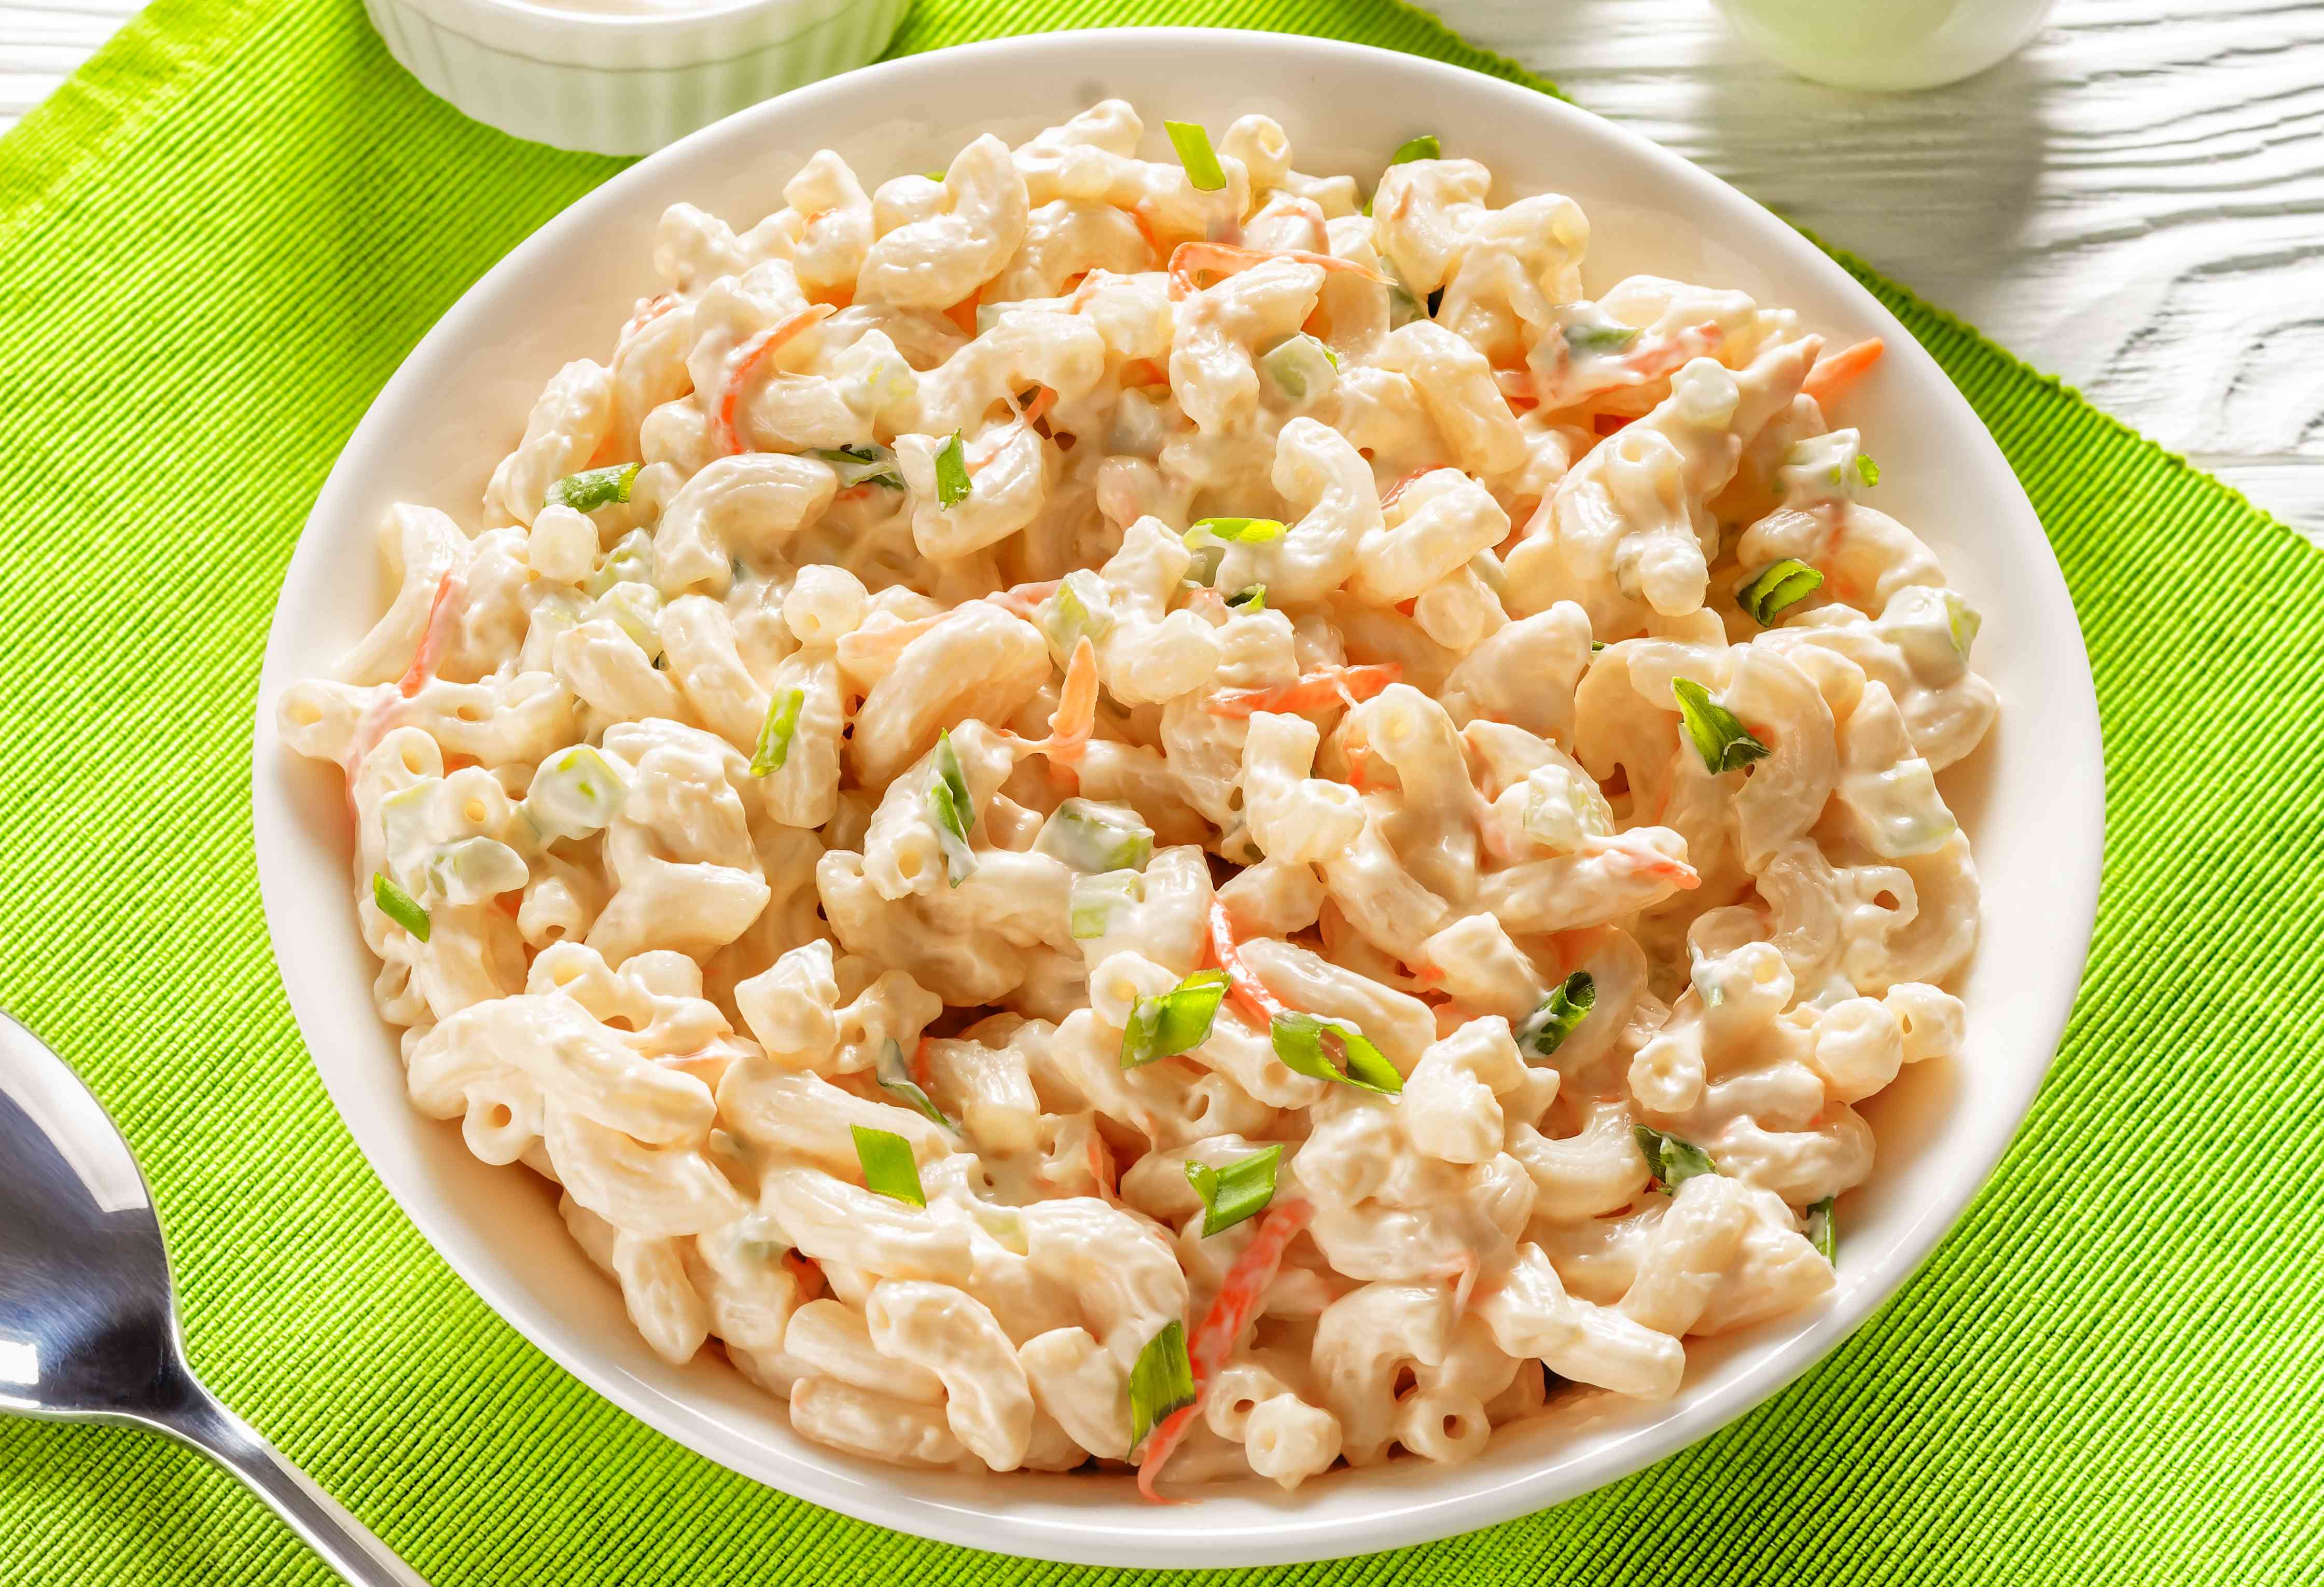 The 1-Ingredient Upgrade for Better Macaroni Salad (It's Already in Your Pantry)